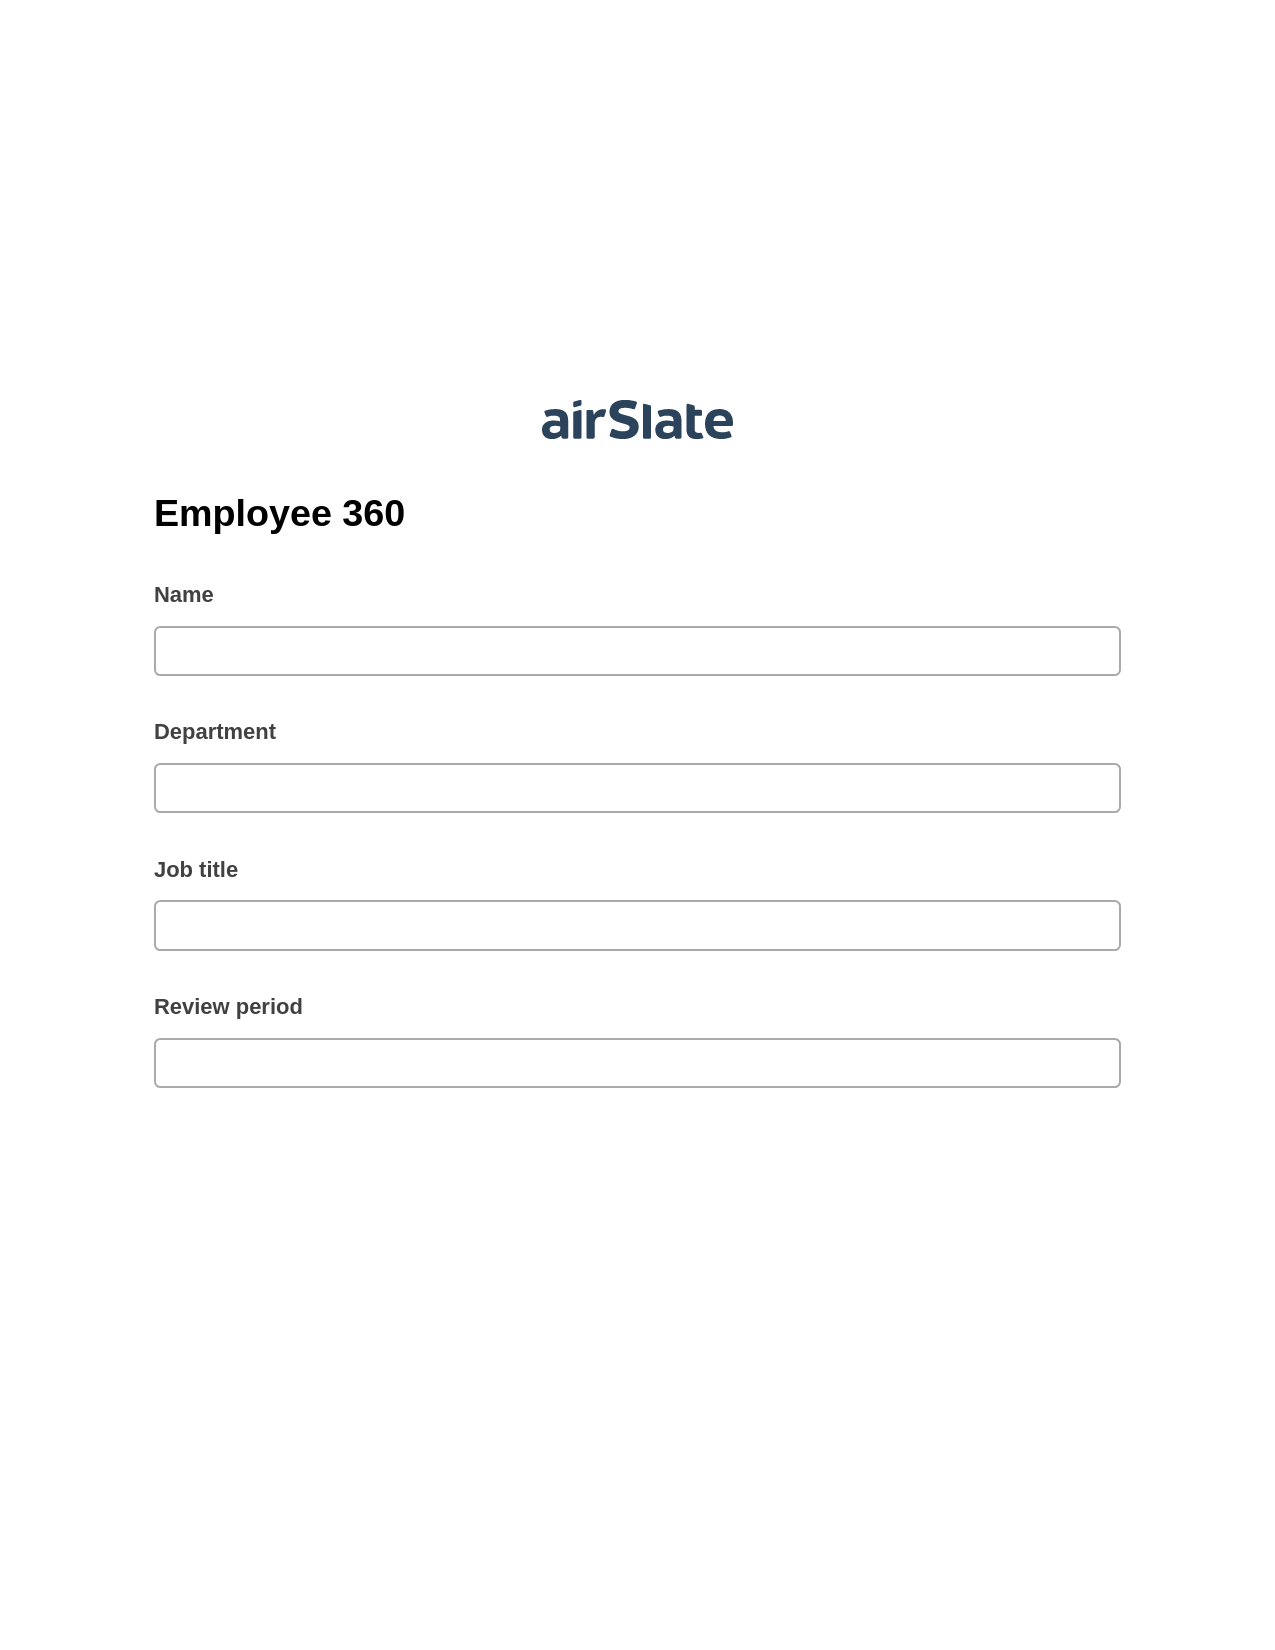 Employee 360 Pre-fill from CSV File Bot, Add Tags to Slate Bot, Export to WebMerge Bot